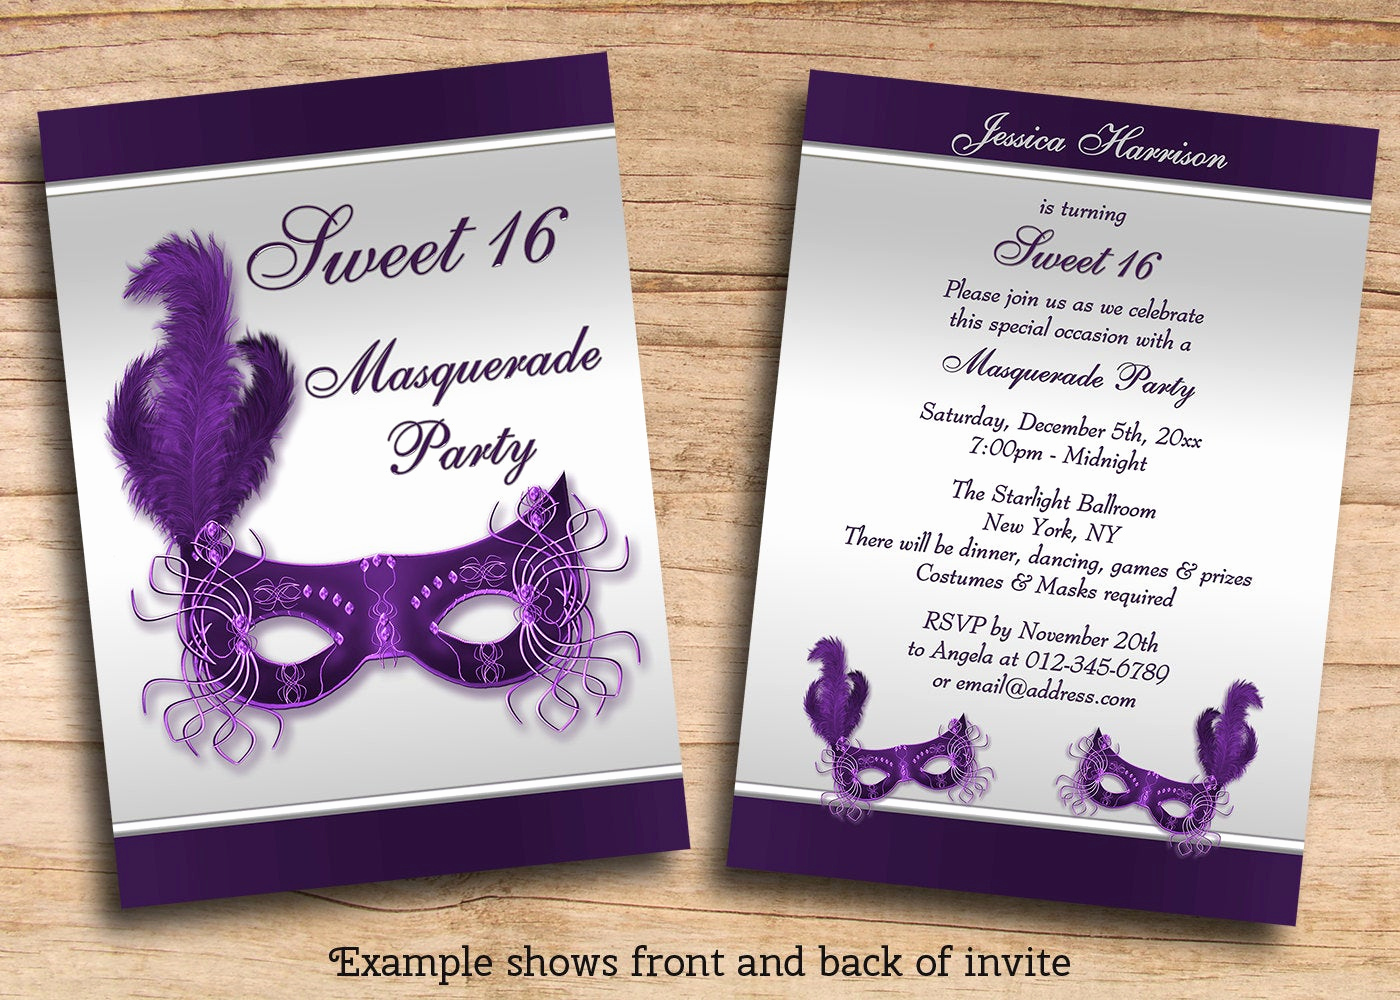 Sweet 16 Invitation Wording Awesome Items Similar to Printable Sweet 16 Masquerade Party